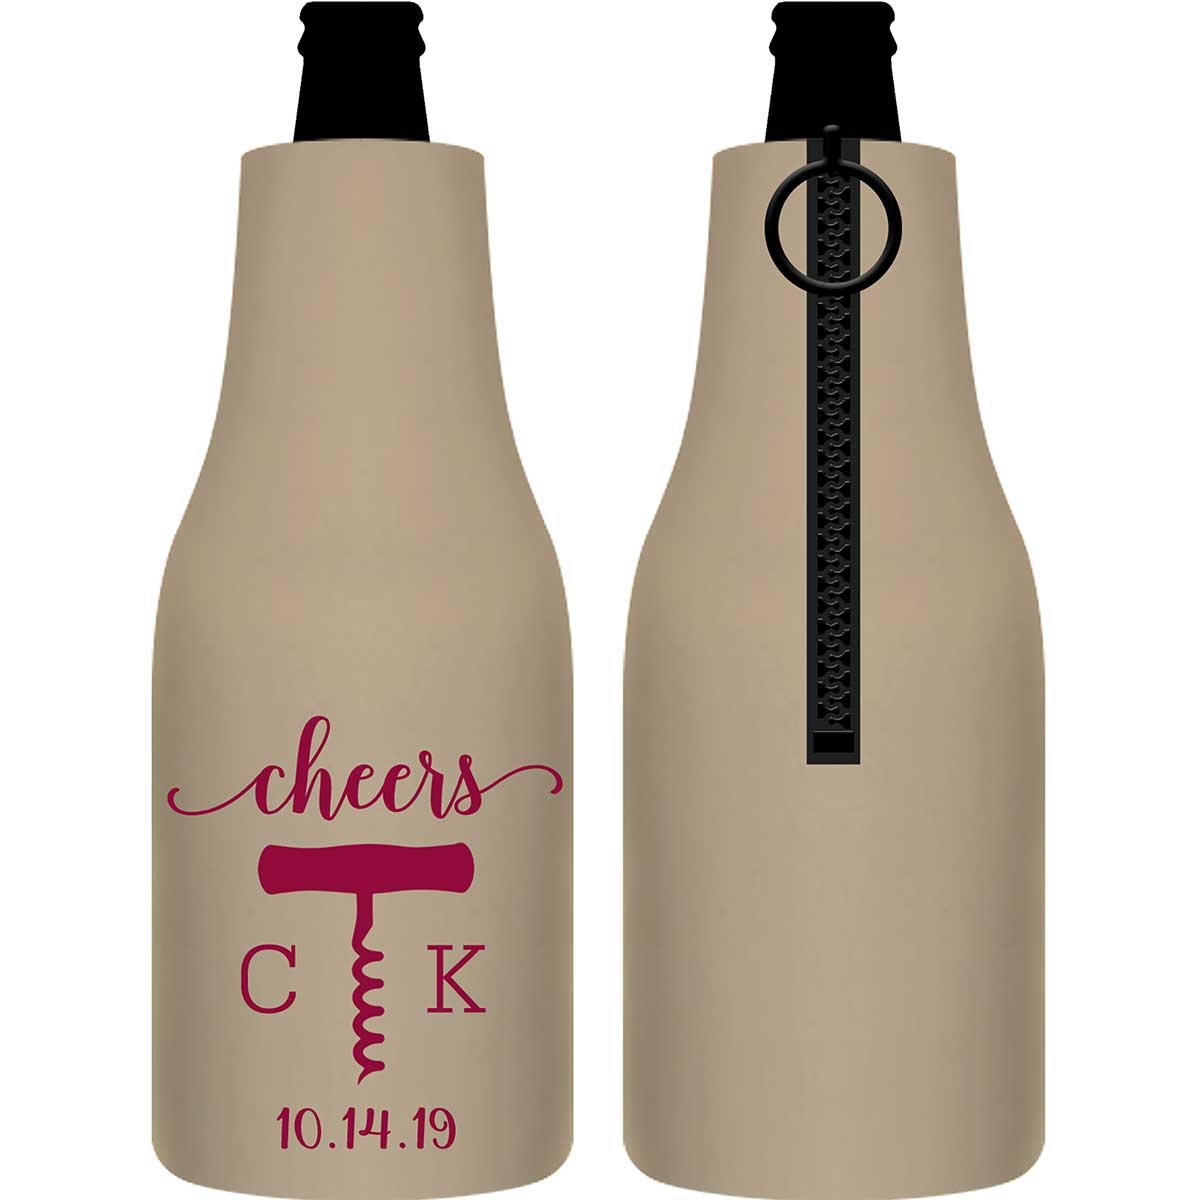 Cheers 5A Vineyard Wedding Foldable Zippered Bottle Koozies Wedding Gifts for Guests